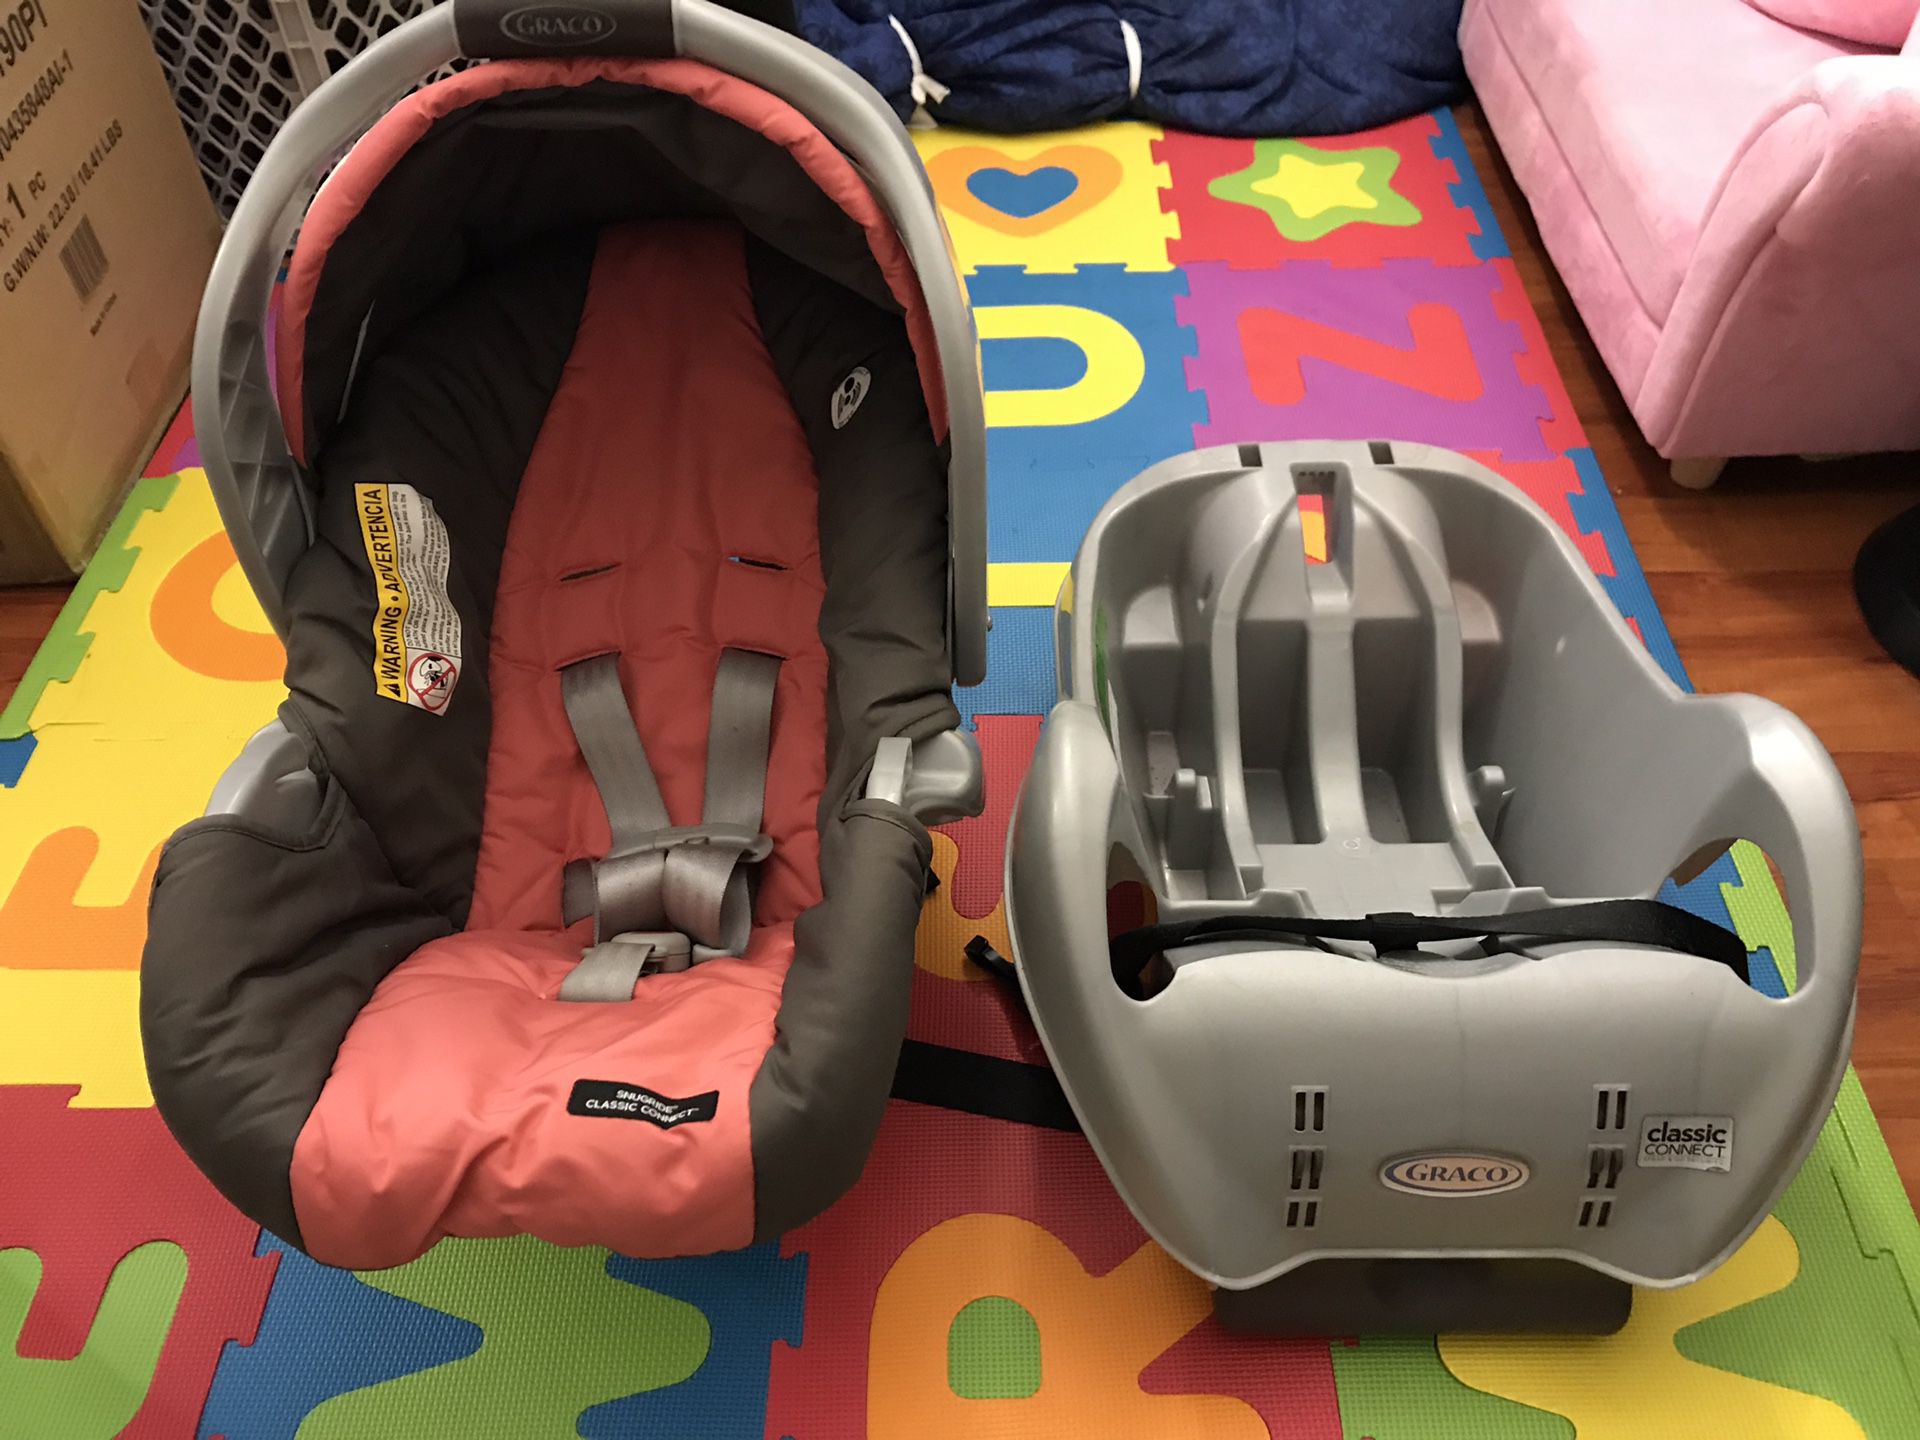 Graco baby infant toddler car seat...